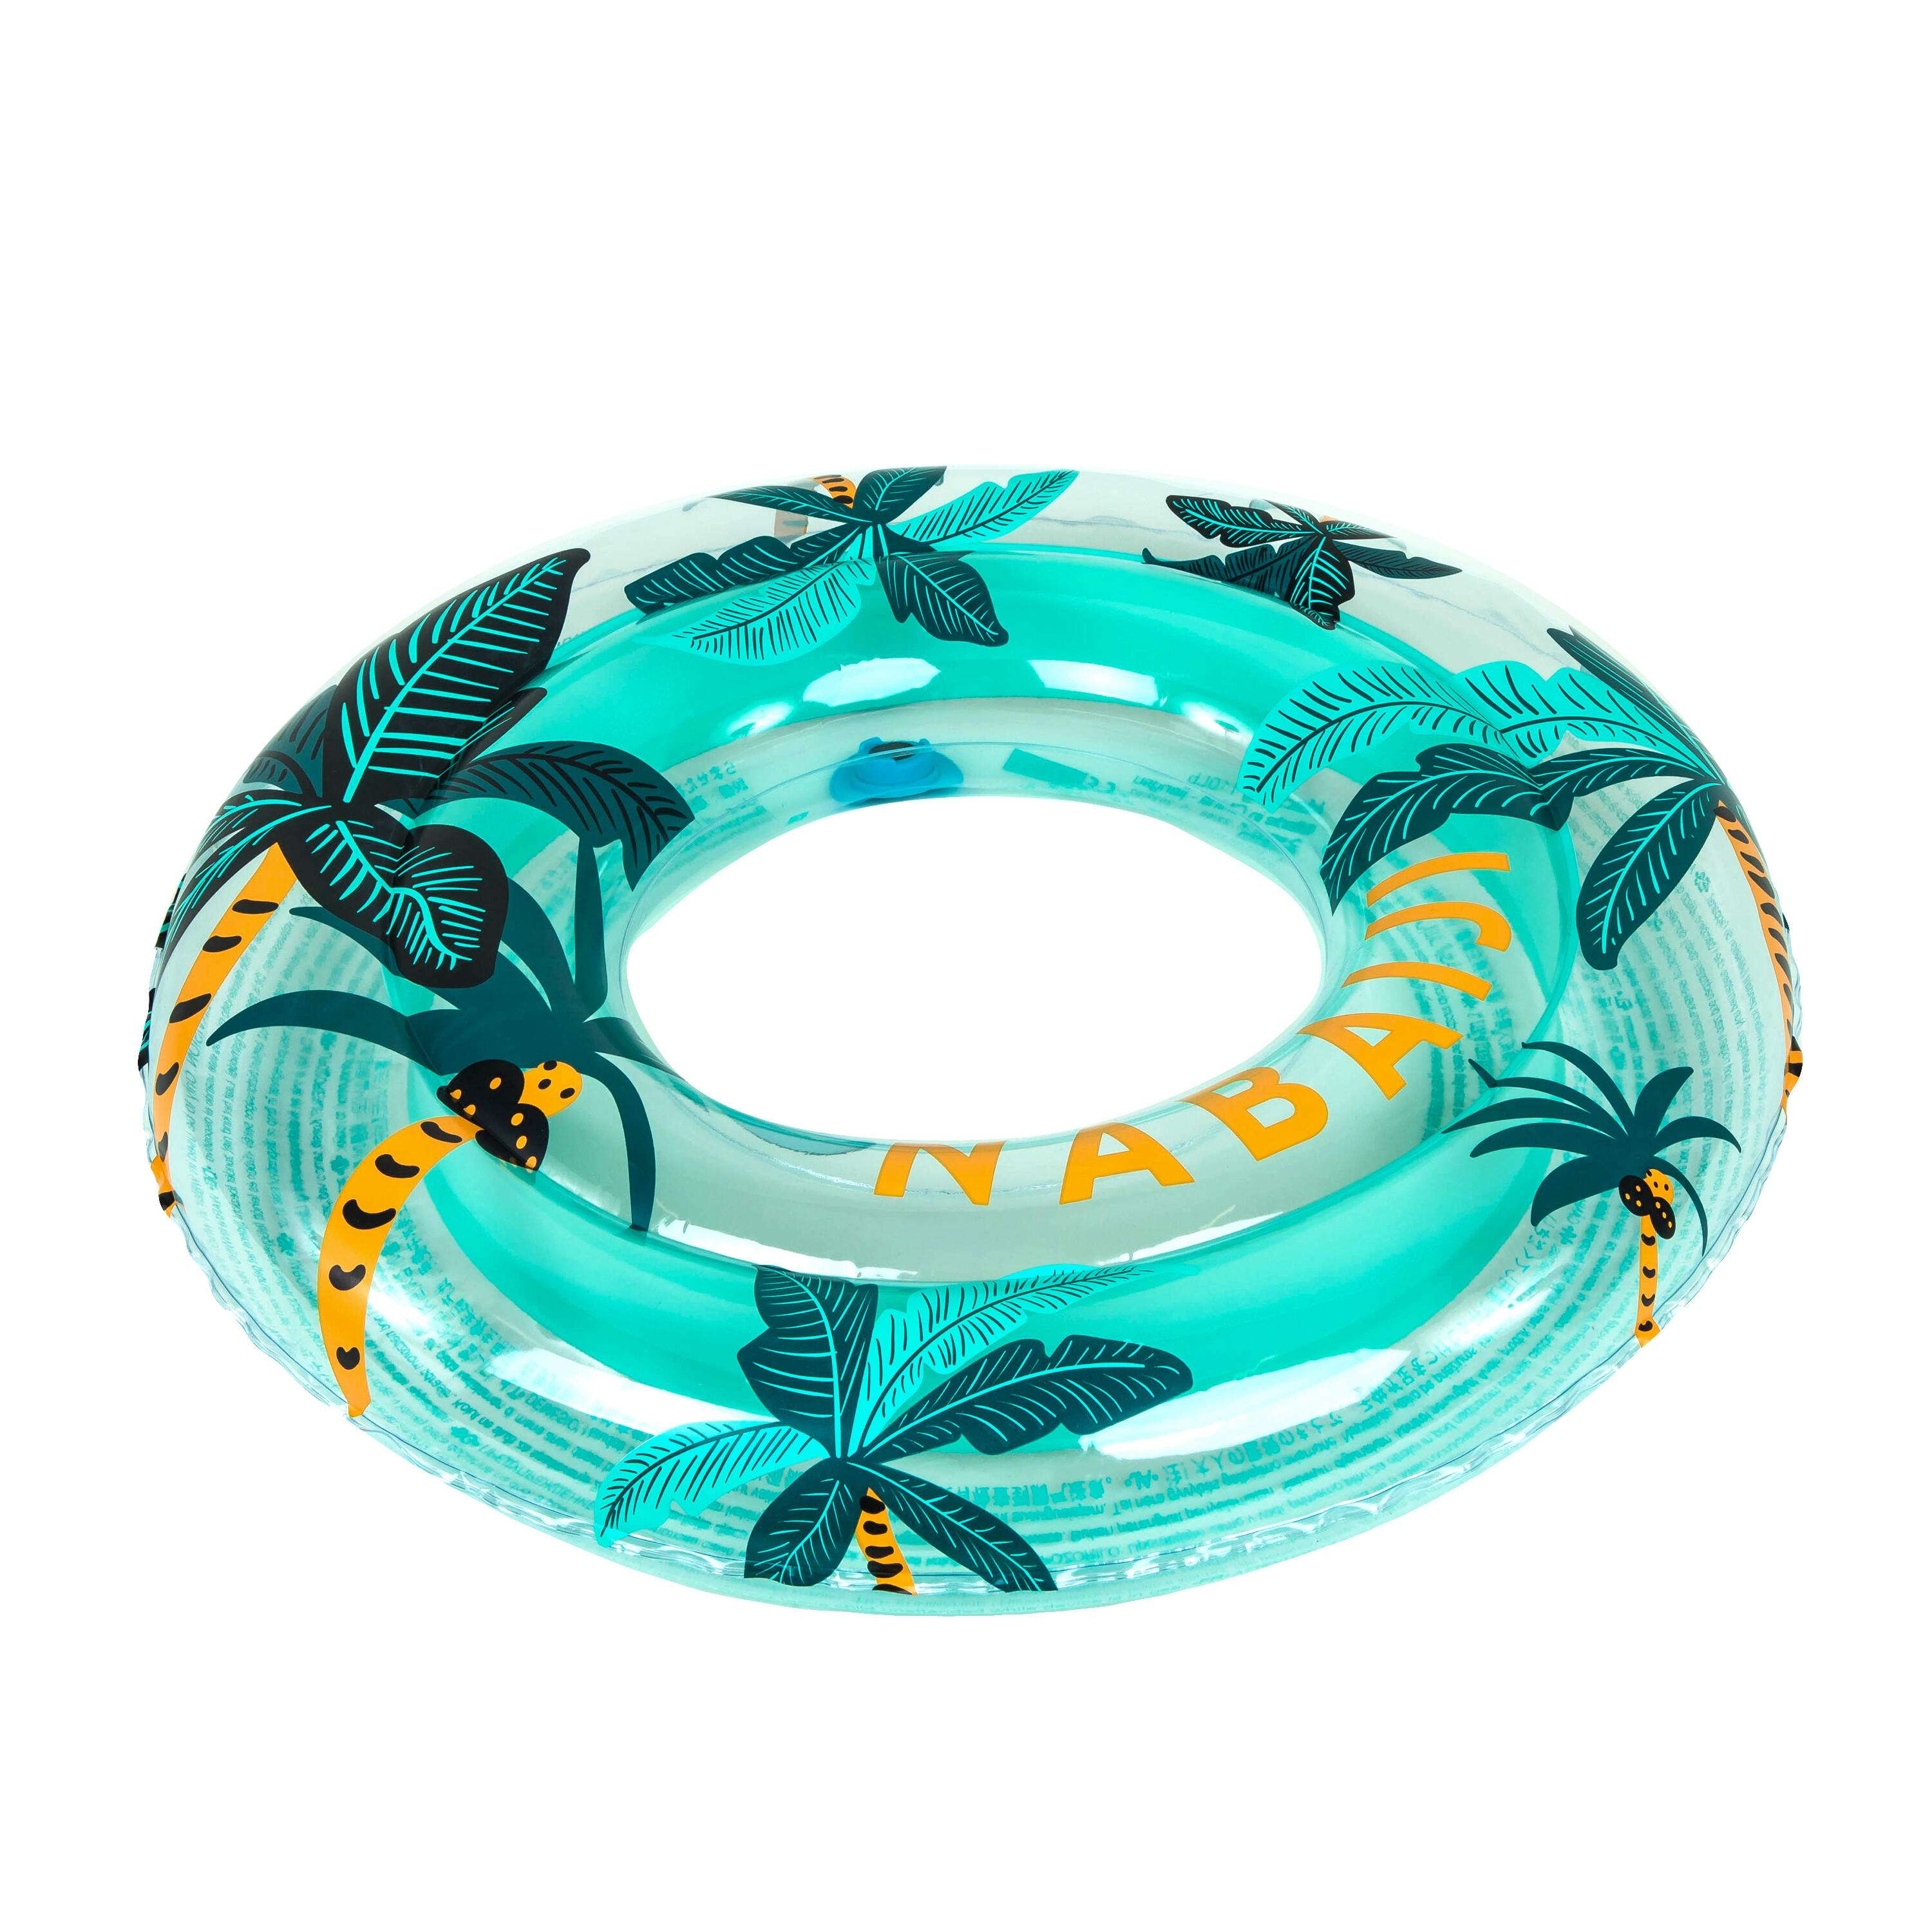 Inflatable pool ring 65 cm - "Palms" transparent 1/8